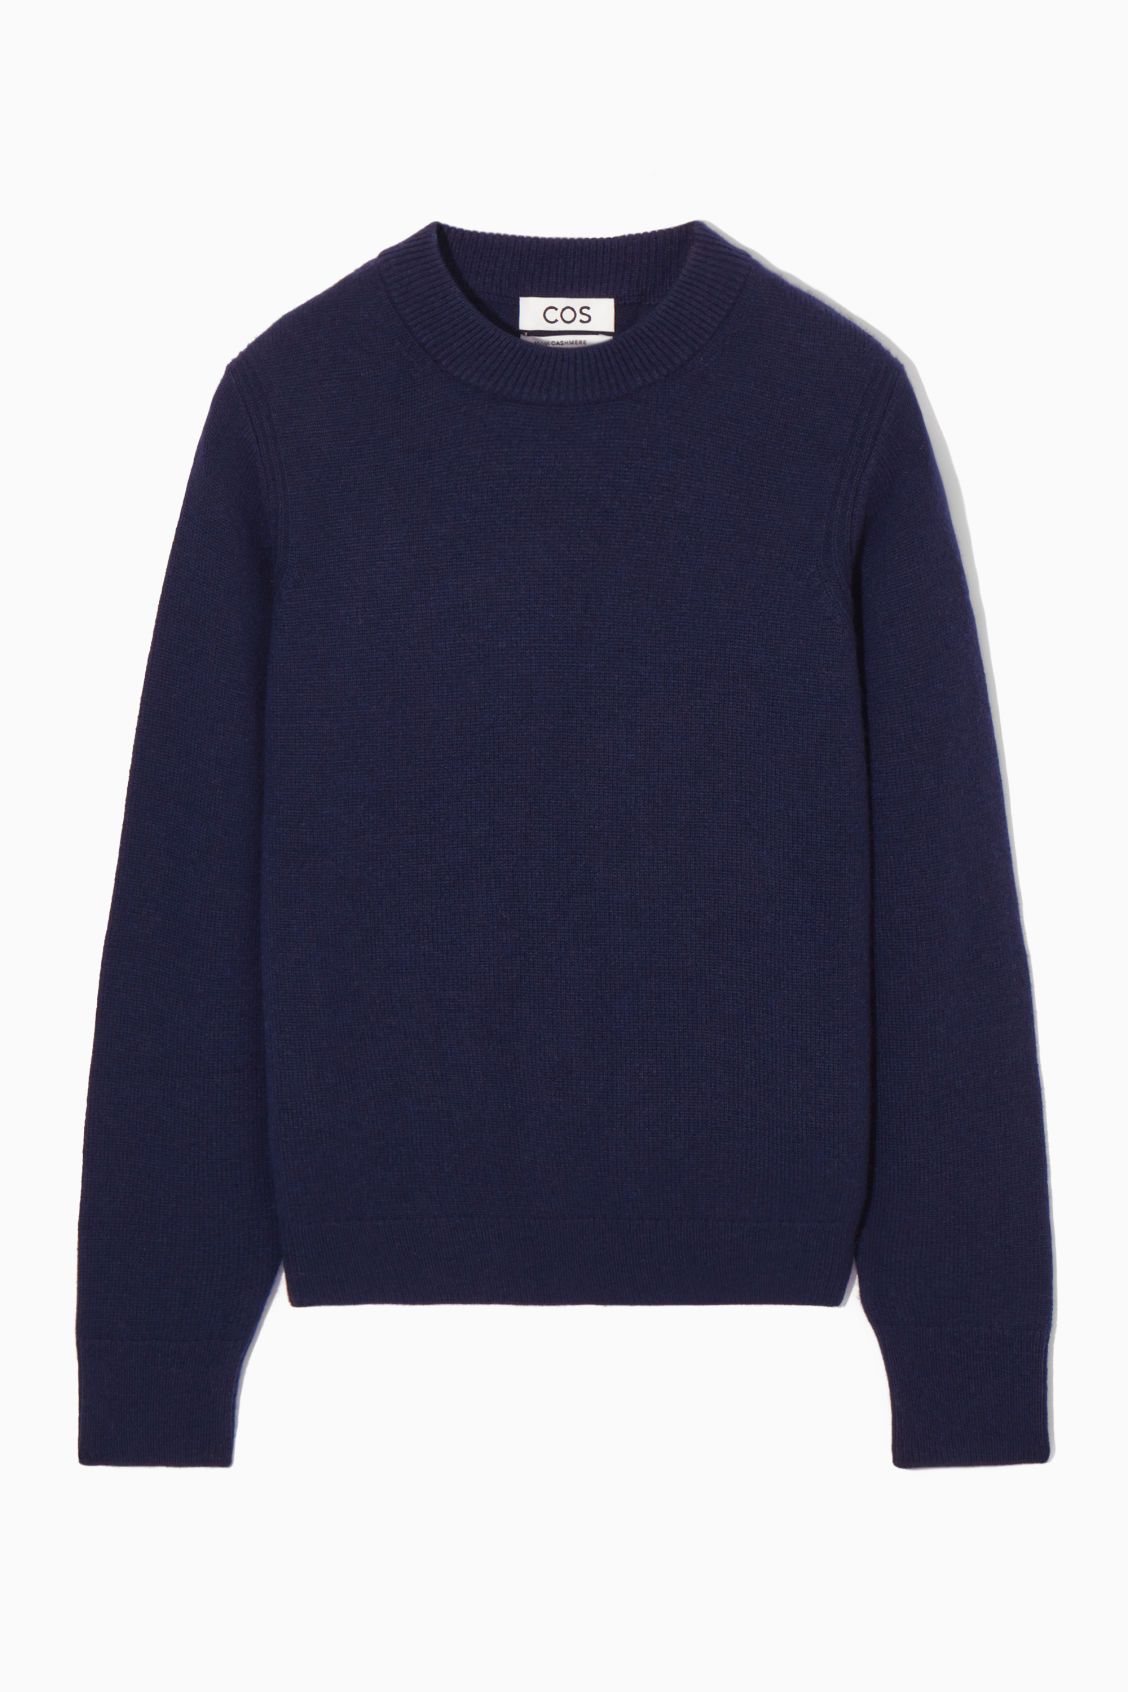 PURE CASHMERE JUMPER - NAVY - COS | COS UK